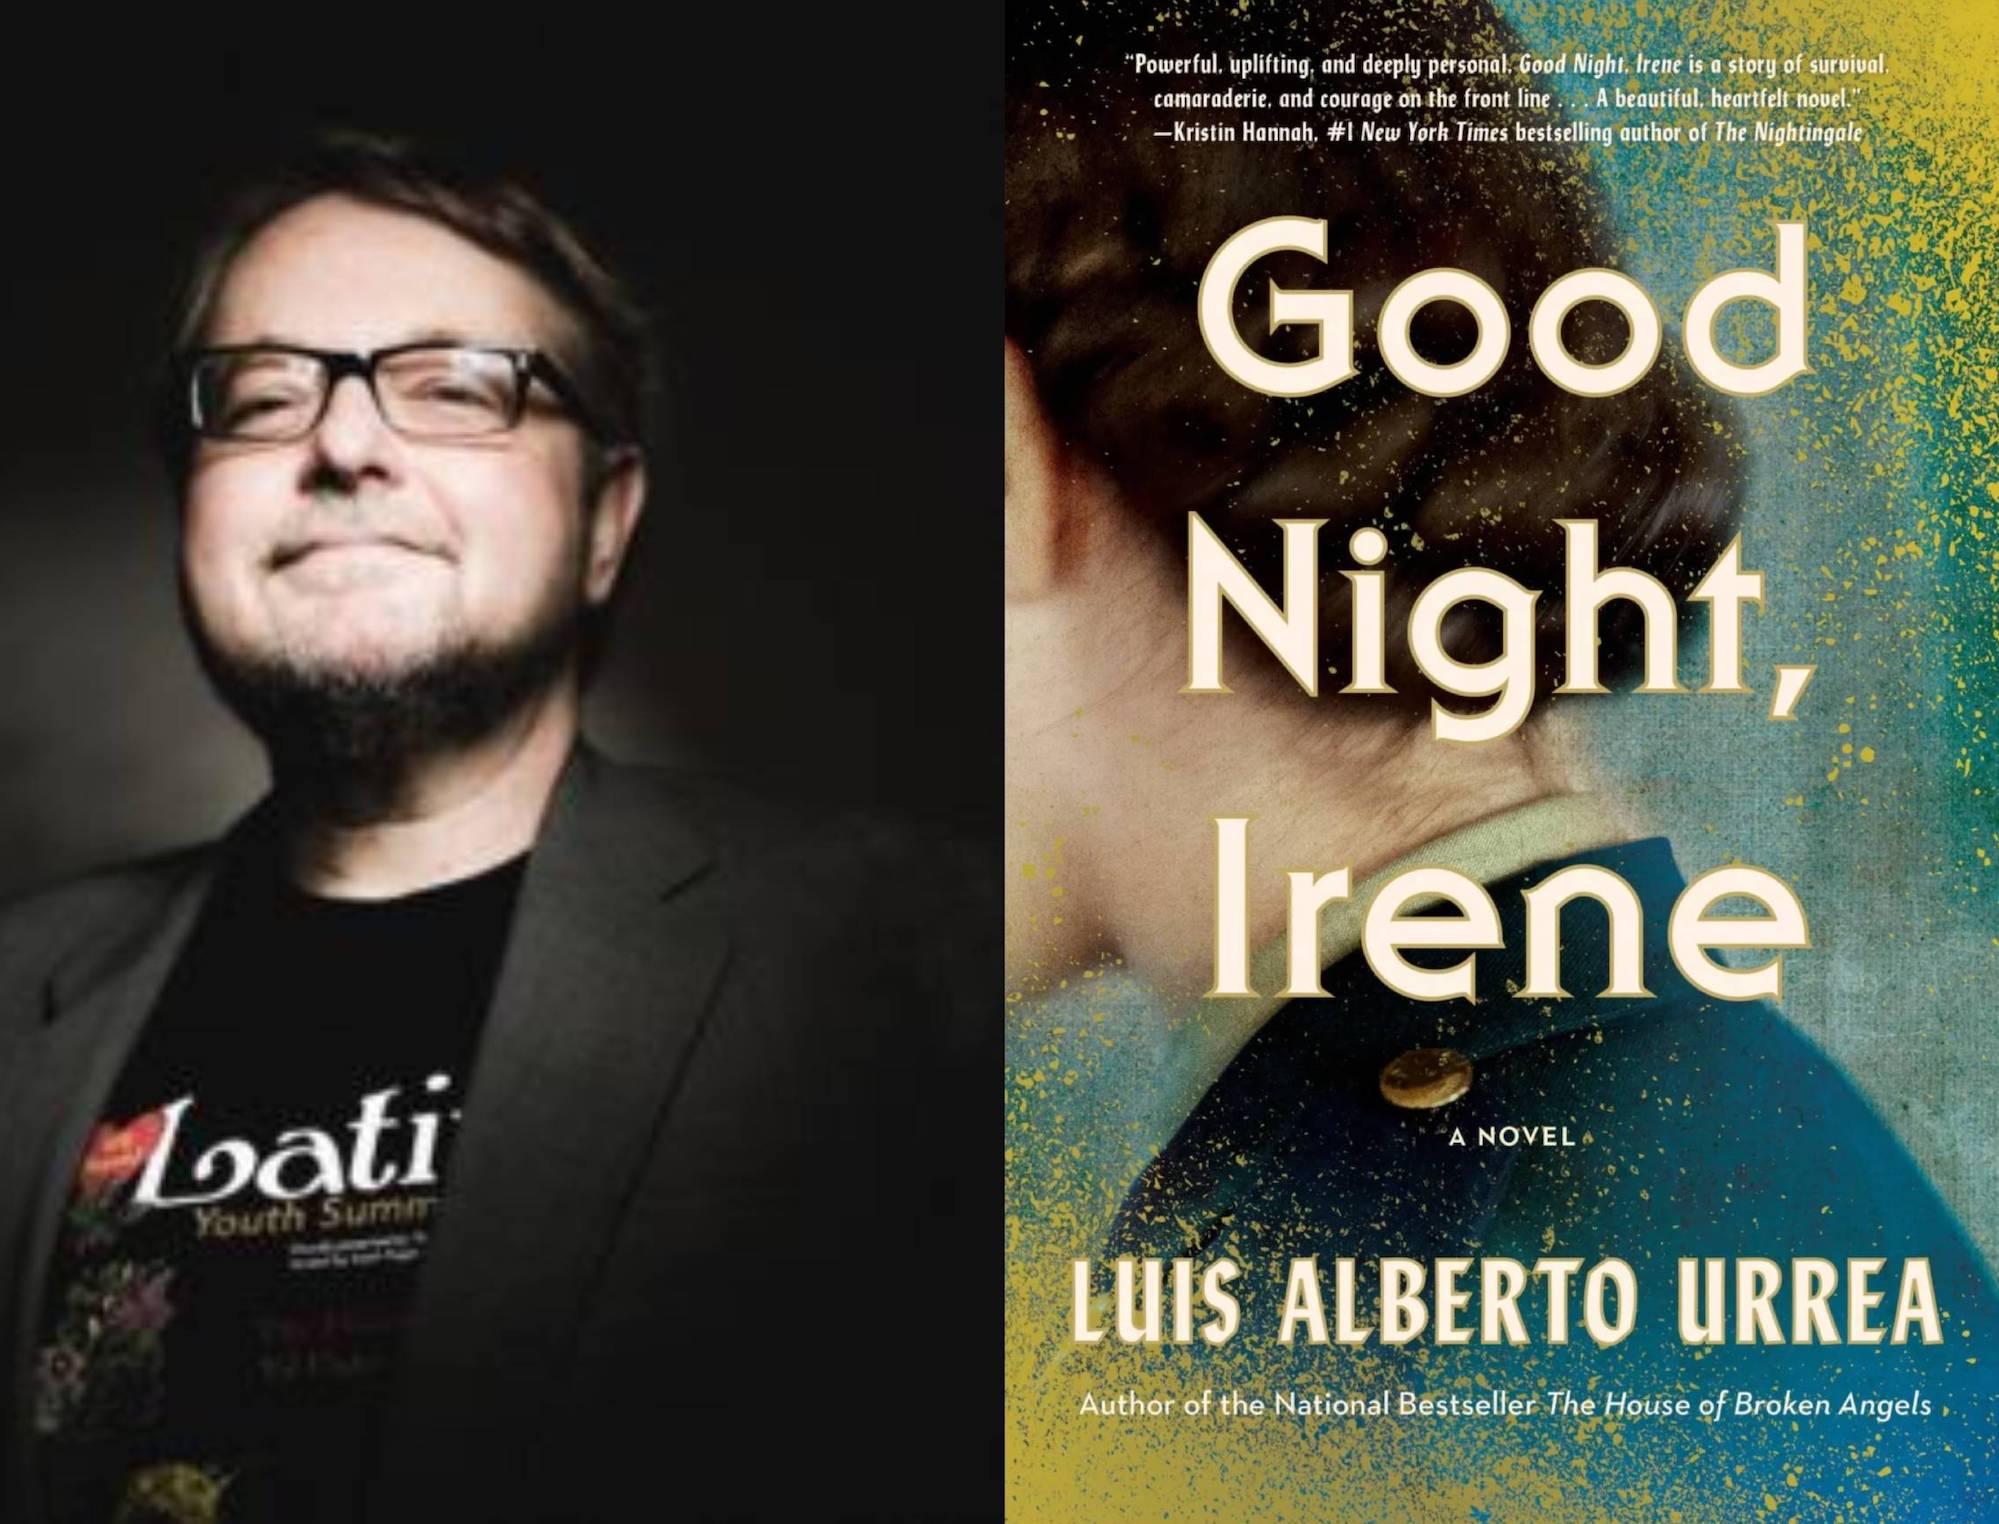 Two photo collage: left: a photo of Urrea, a Mexican man with short dark hair and black glasses wearing a black t-shirt and blazer. Right: the cover of Good Night, Irene, a turquoise and yellow background with a woman looking off to the side without her face visible